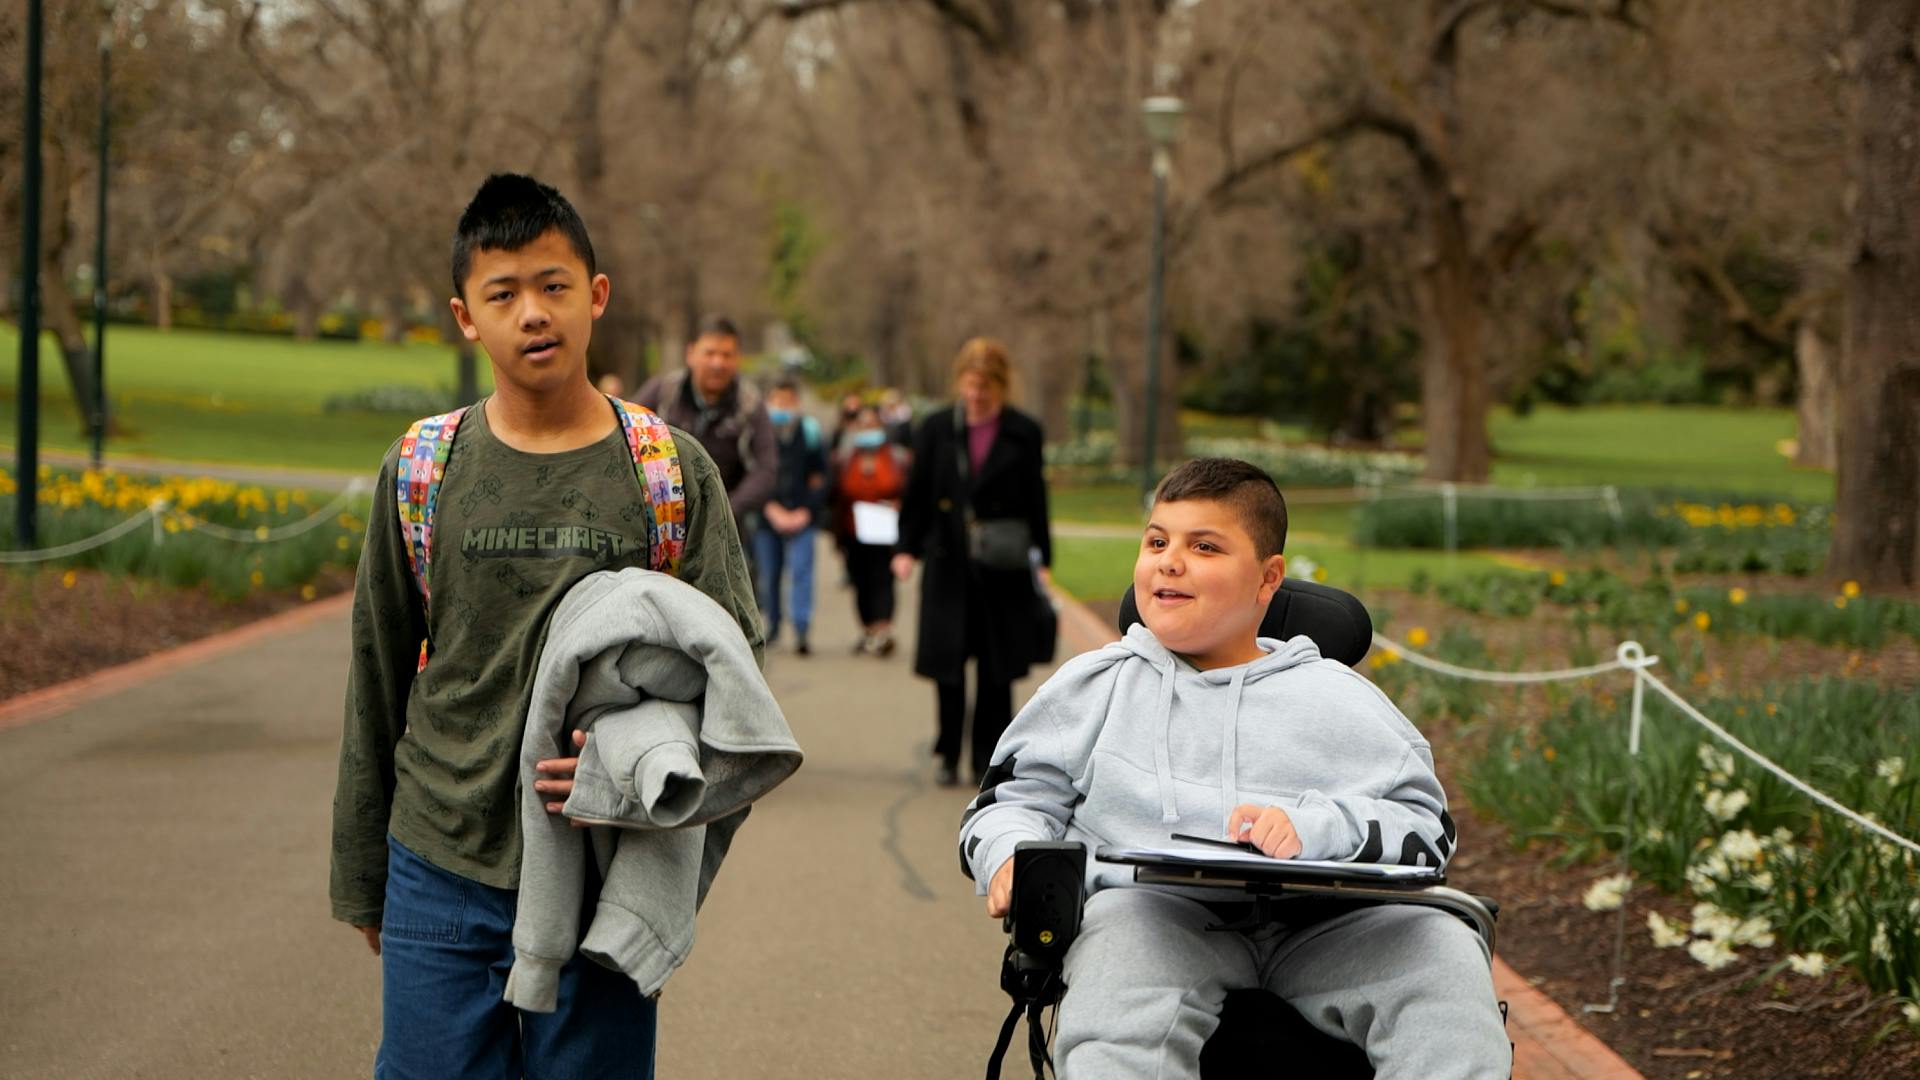 Image of two school aged males in a park. The boy on the left is wearing a green shirt and the boy on the right is wearing a grey jumper and using a wheelchair.